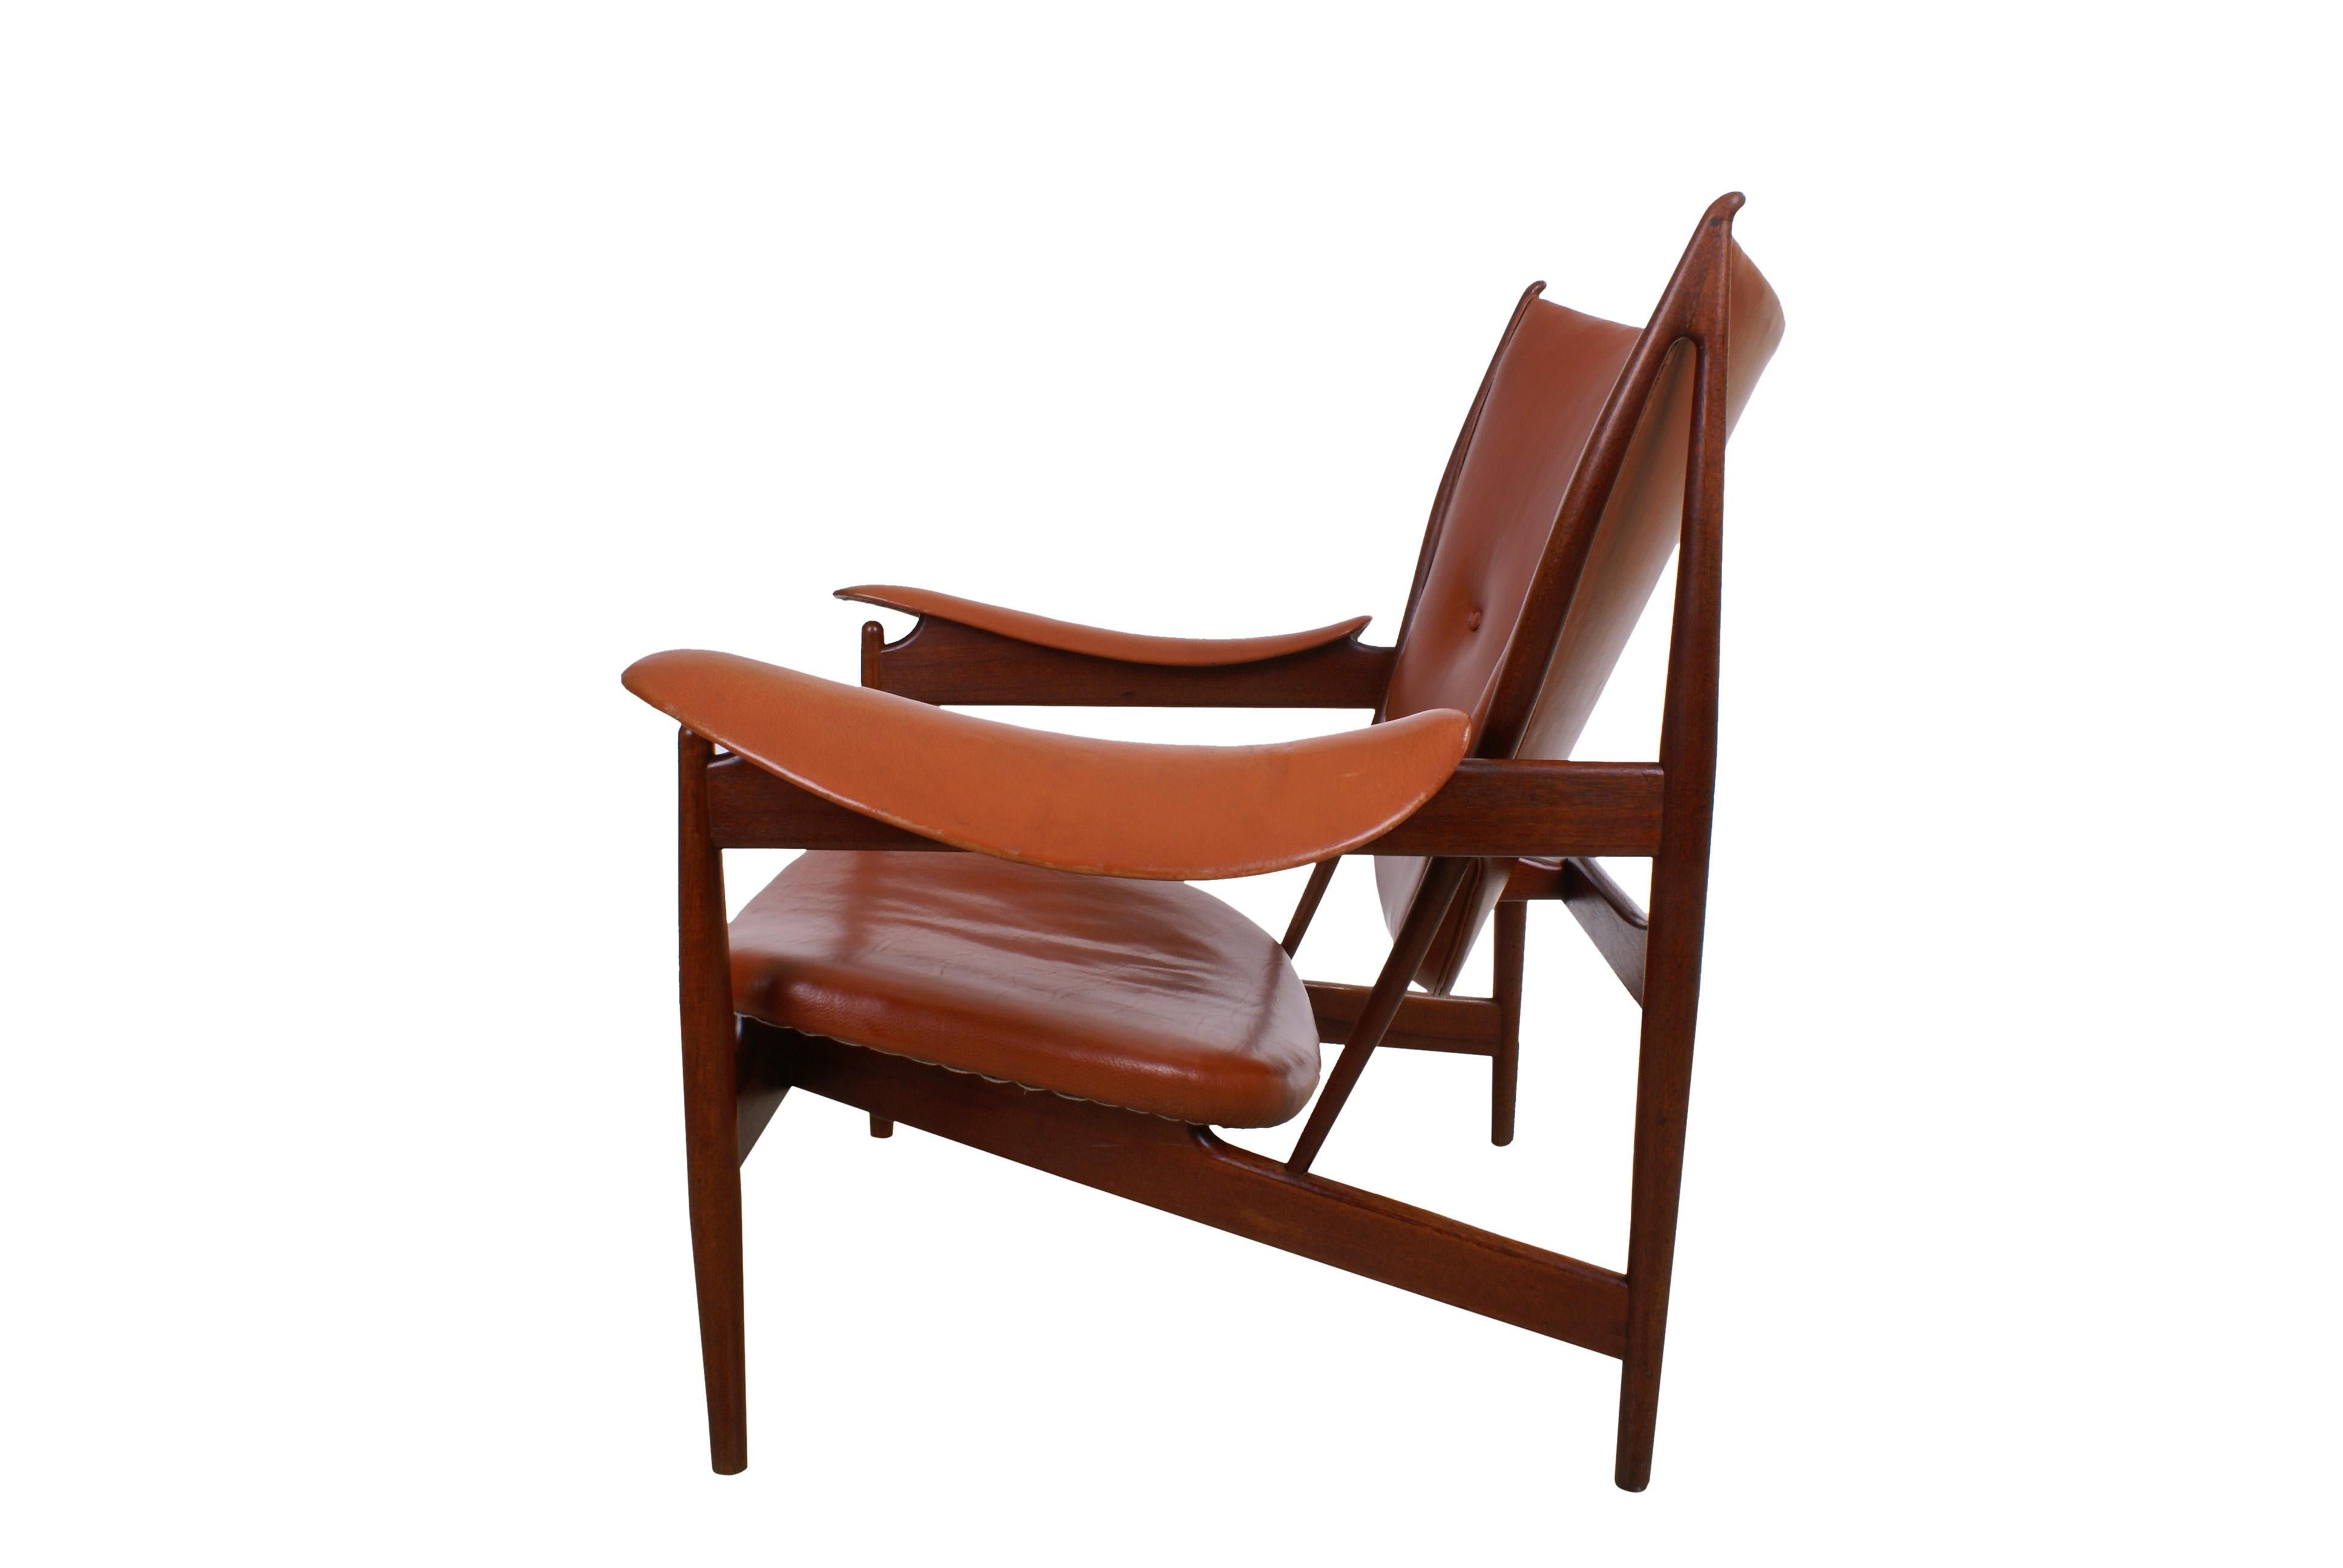 Finn Juhl Rare 'Chieftain' Chair in Teak and Leather for Niels Vodder, 1949 For Sale 1